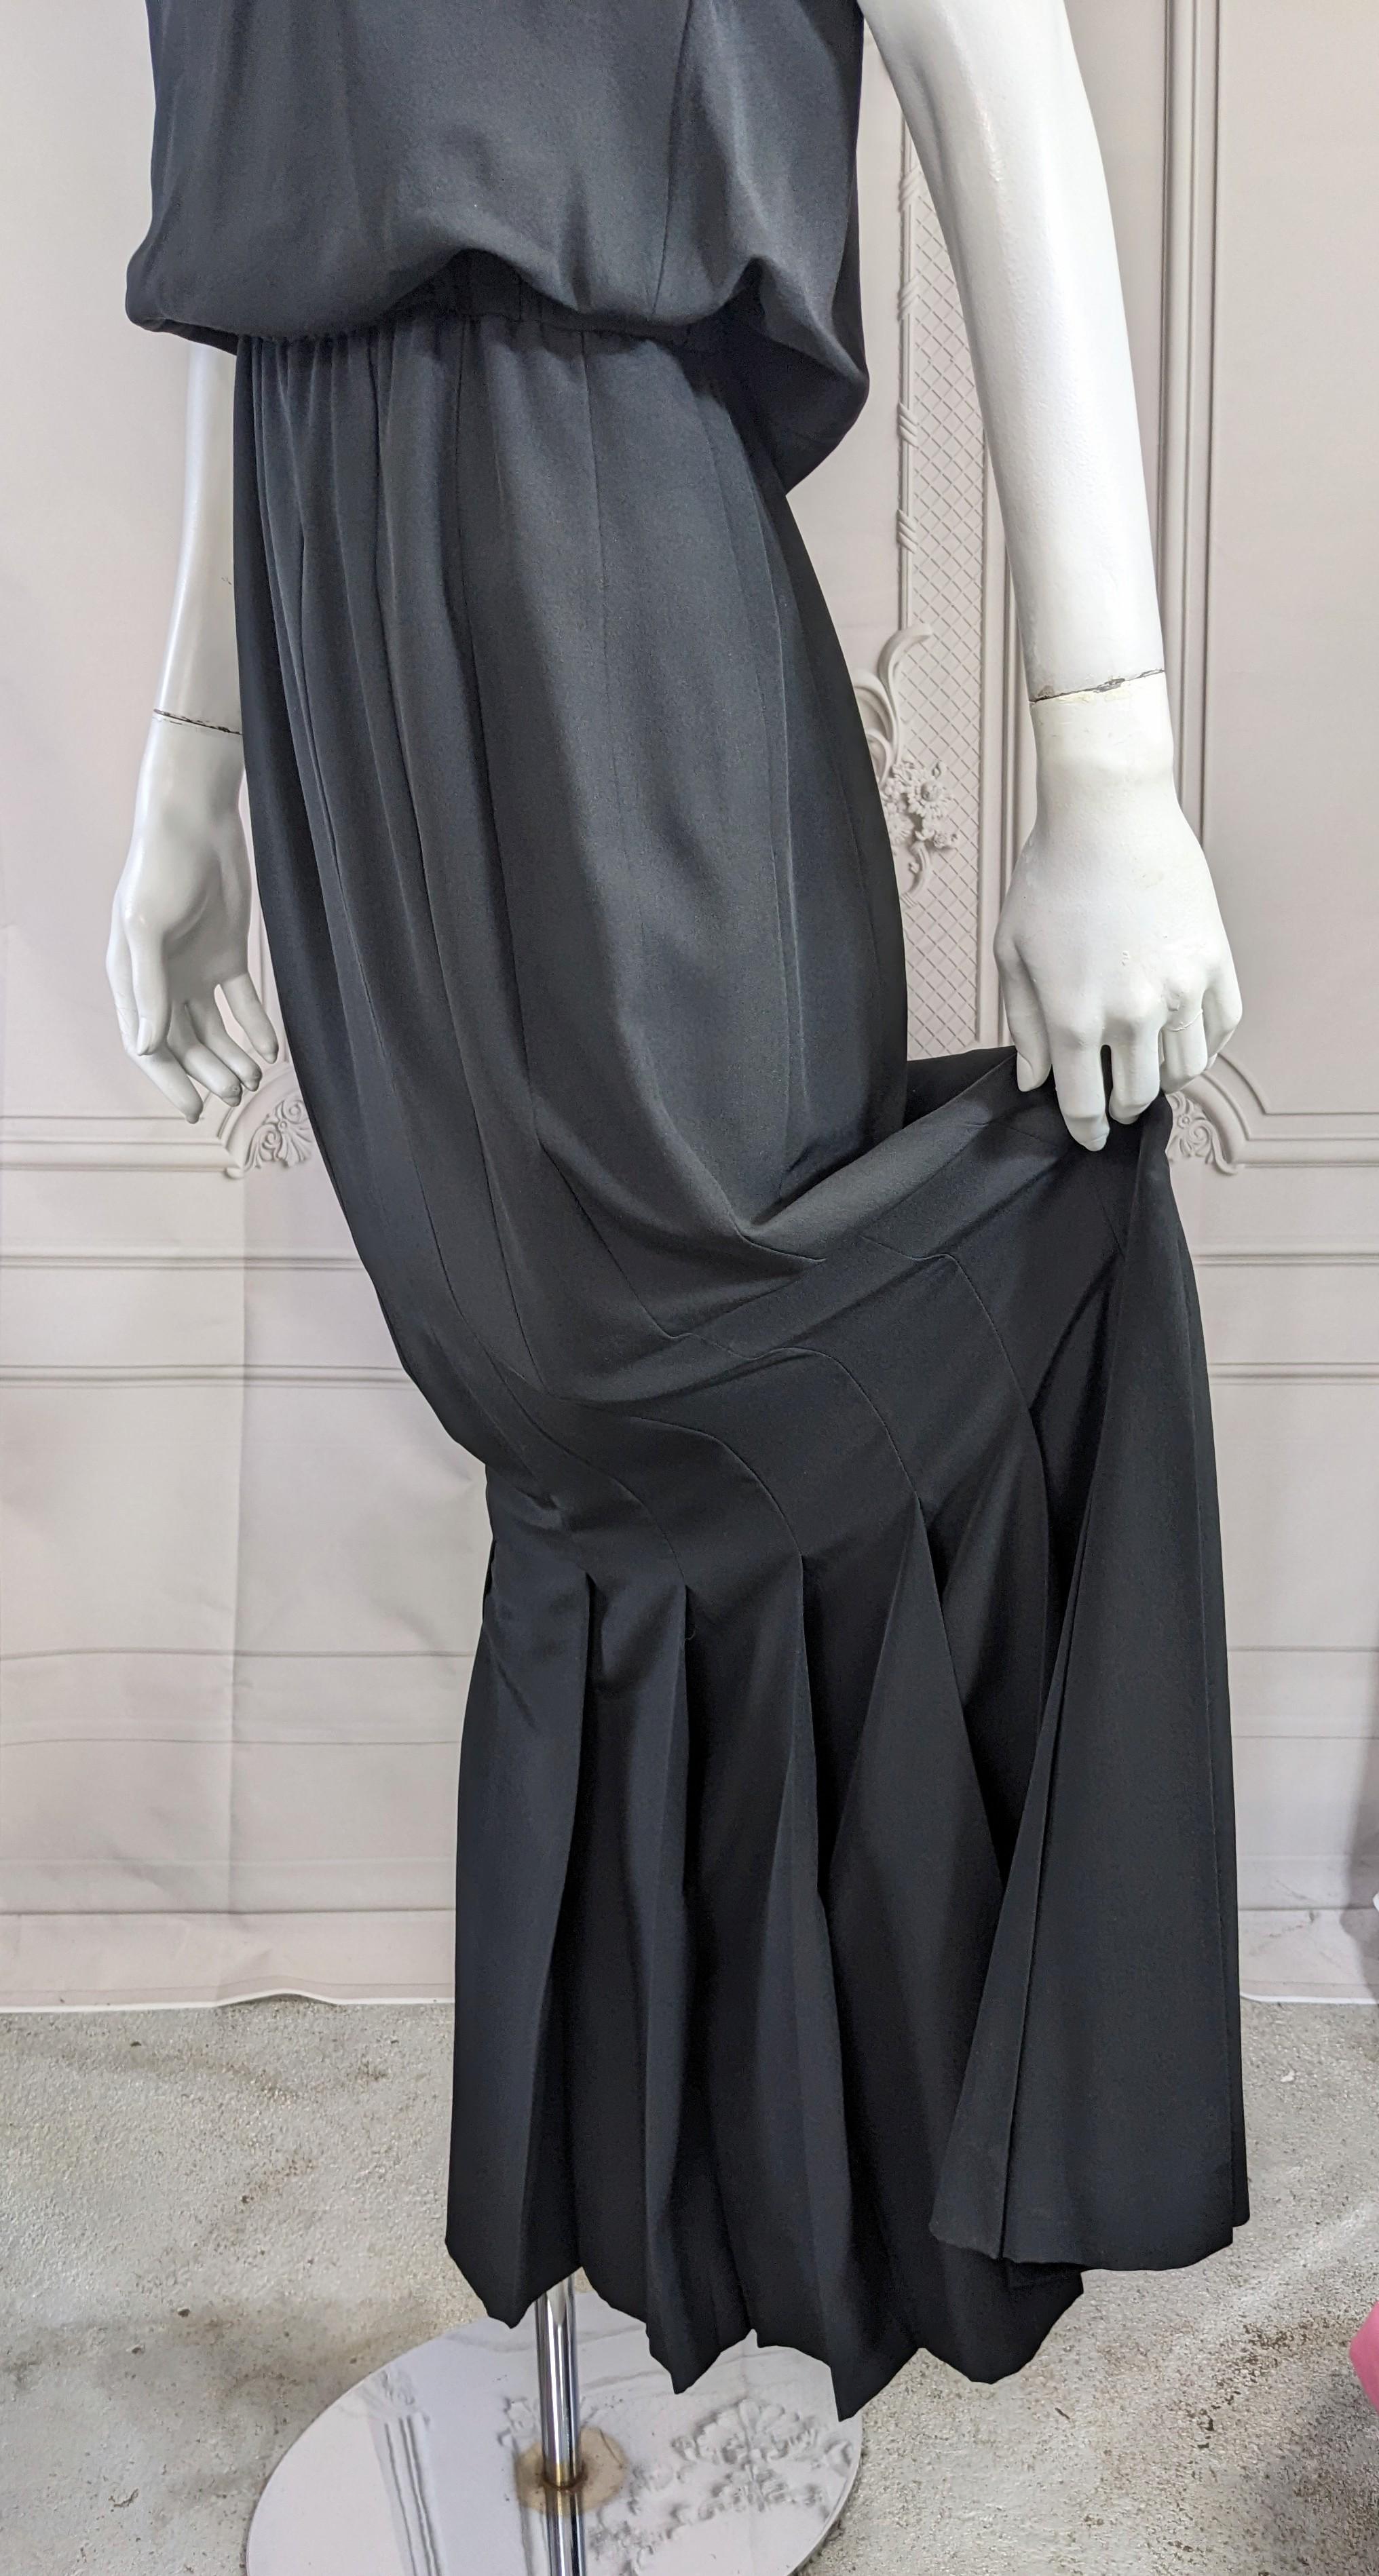 Chanel High Neck Column Gown In Good Condition For Sale In New York, NY